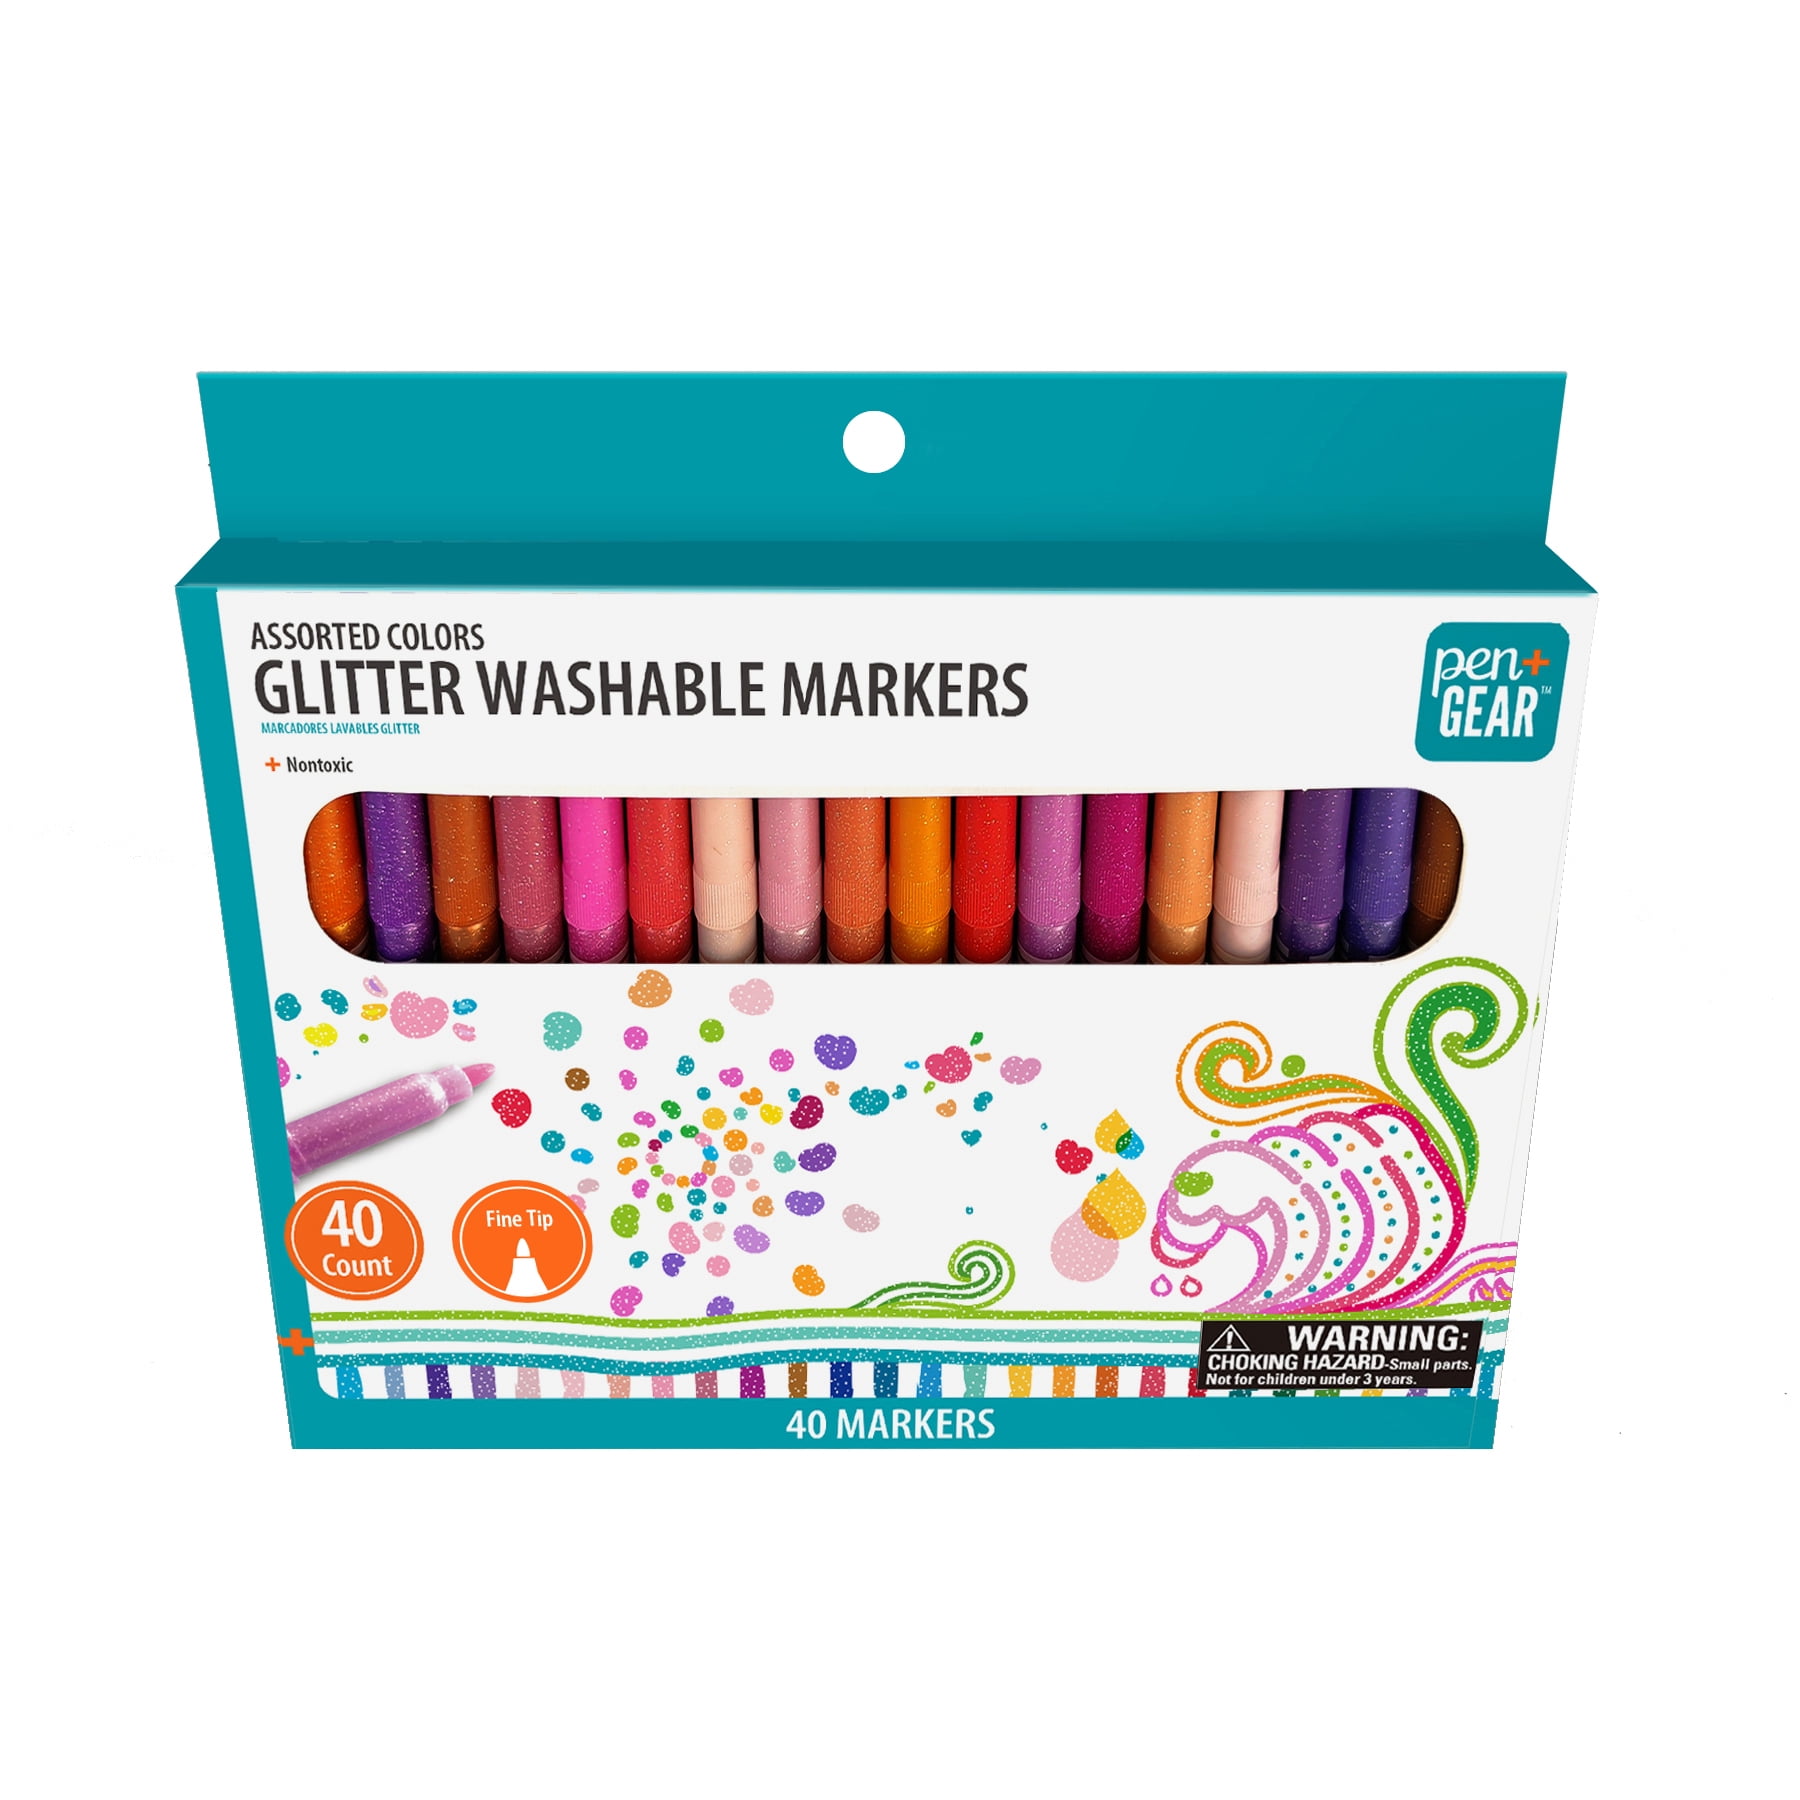 Pen + Gear 40CT Fine Tip Glitter Washable Markers Assorted Colors